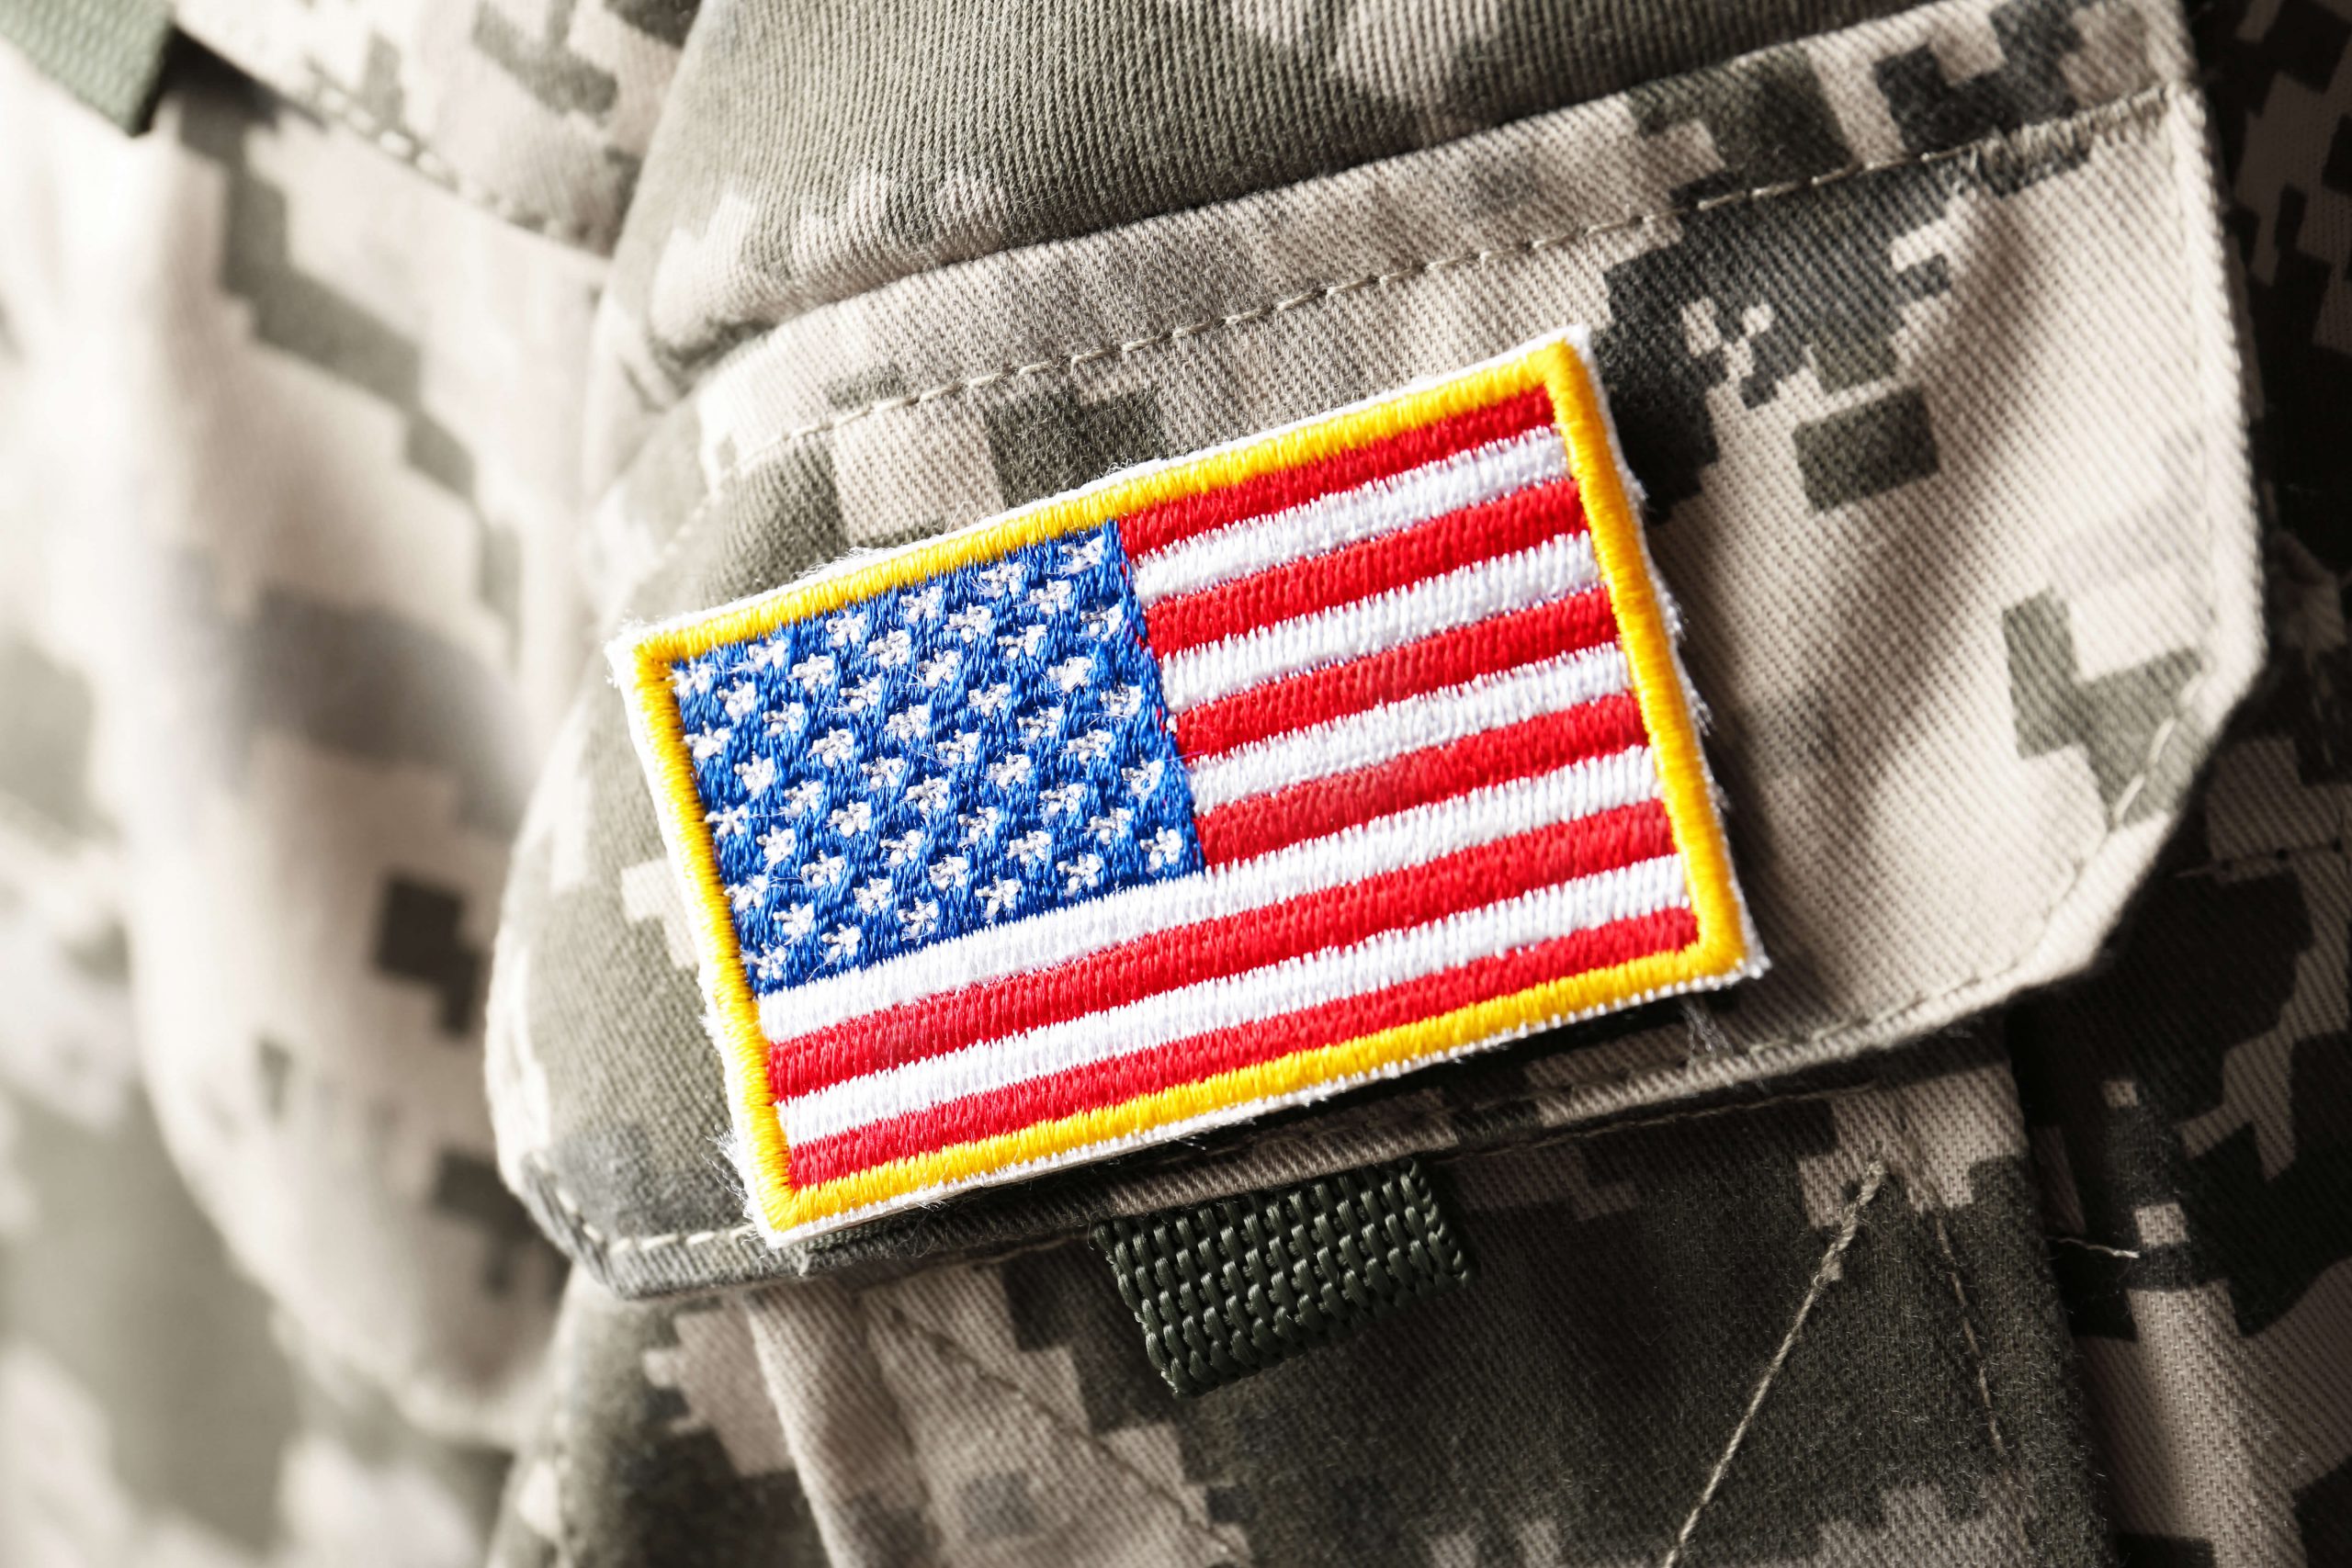 An image of military uniform and the American flag